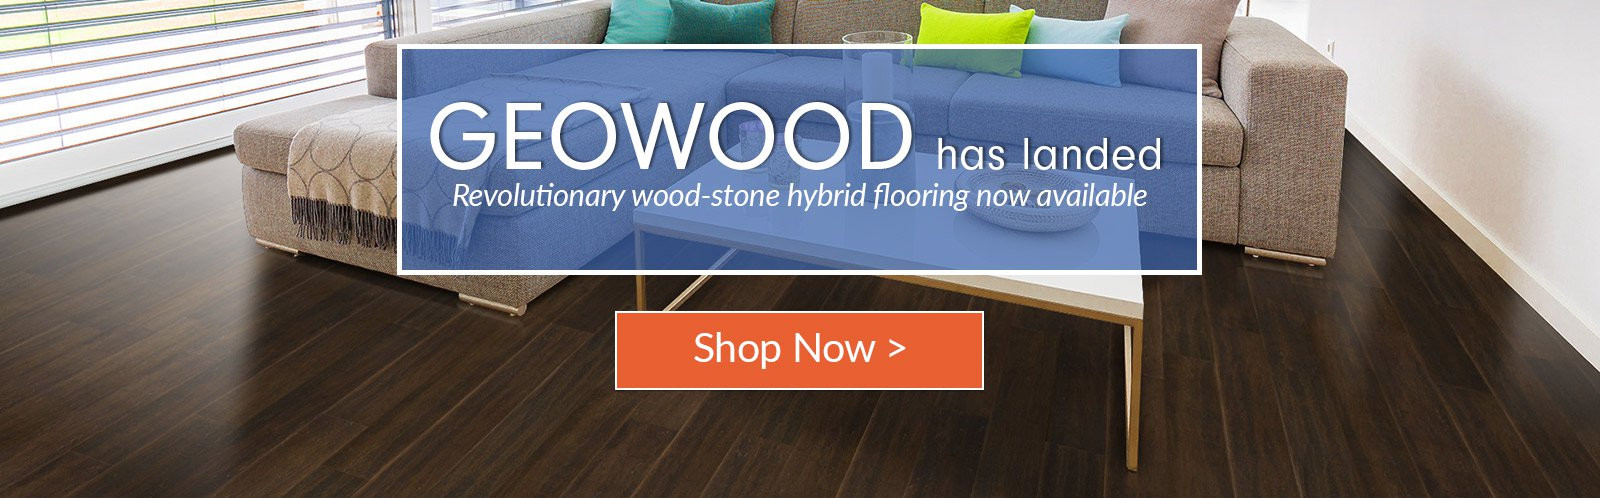 md hardwood flooring of green building construction materials and home decor cali bamboo intended for geowood launch homepage slider